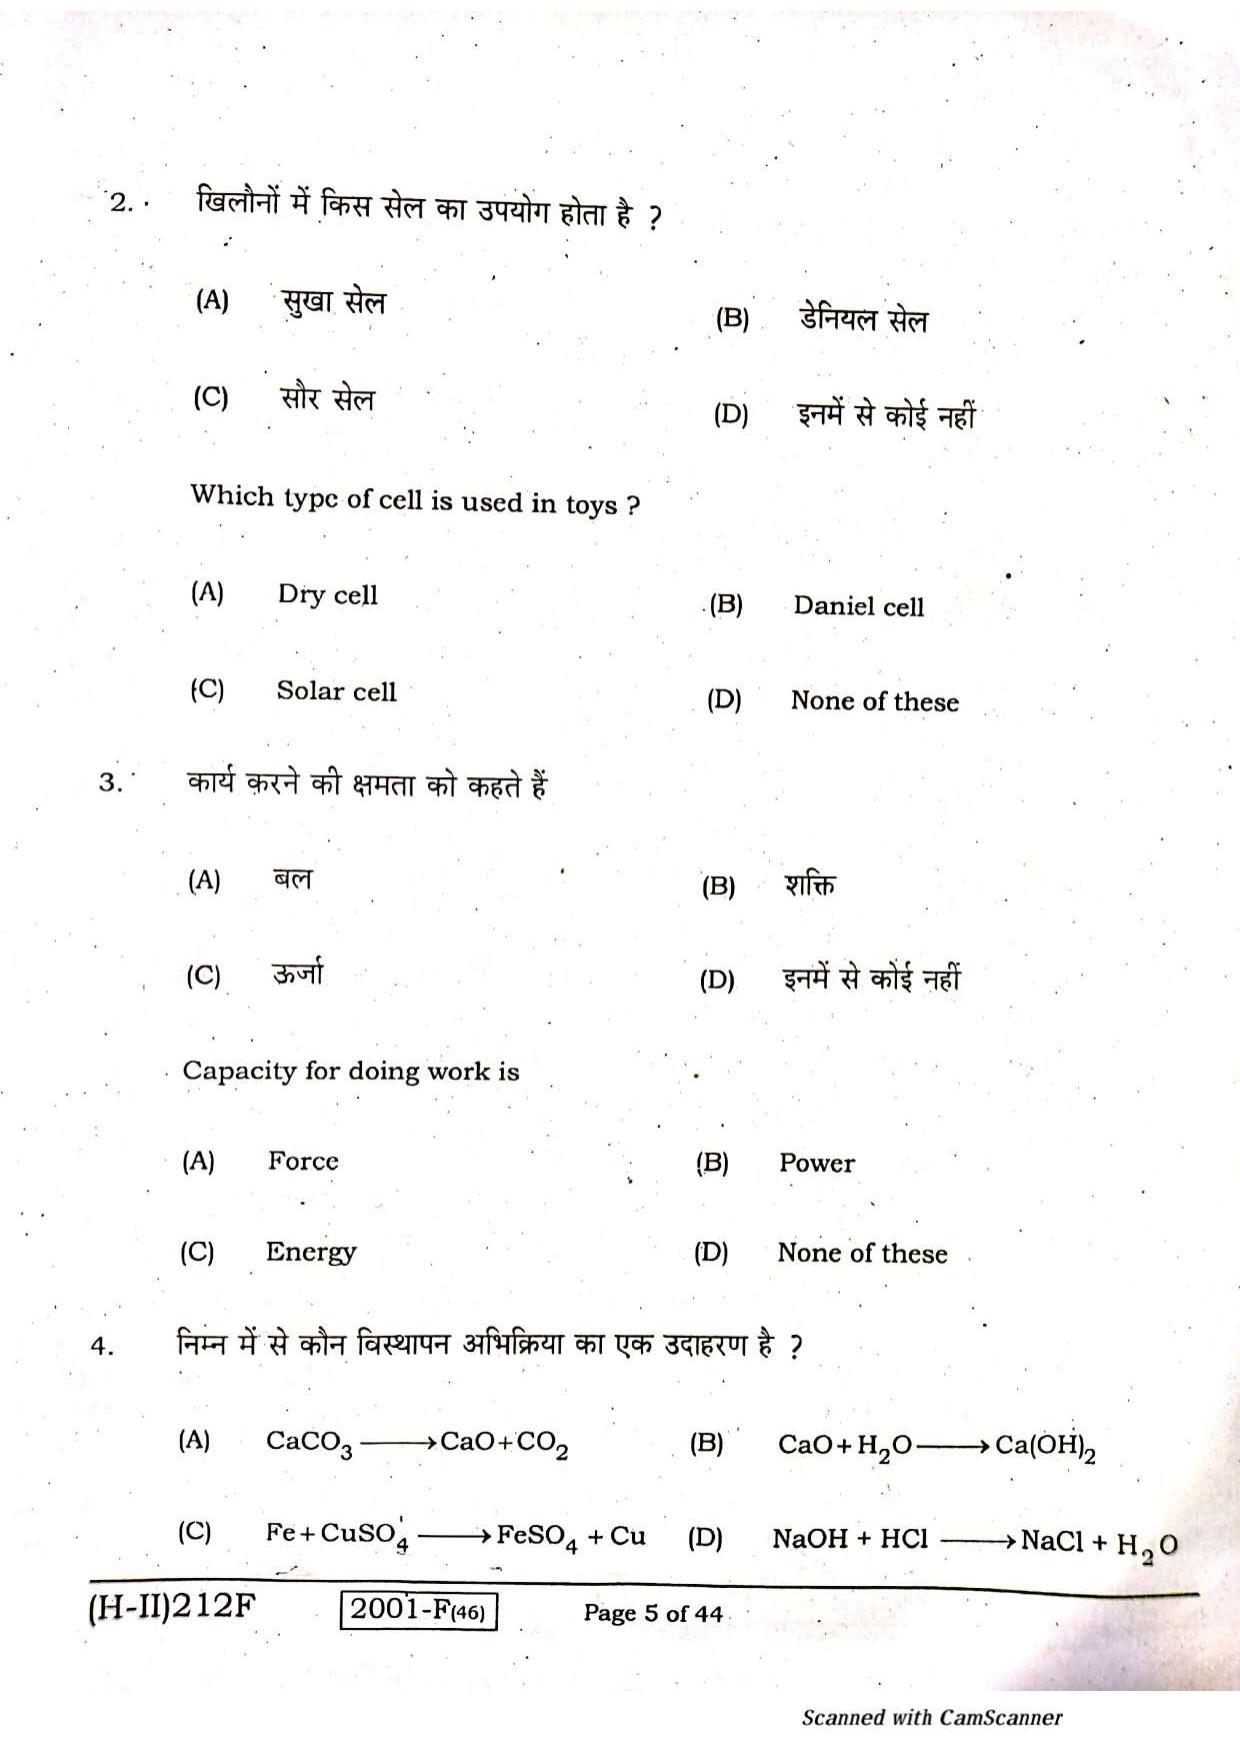 Bihar Board Class 10 Science 2021 (2nd Sitting) Question Paper - Page 3